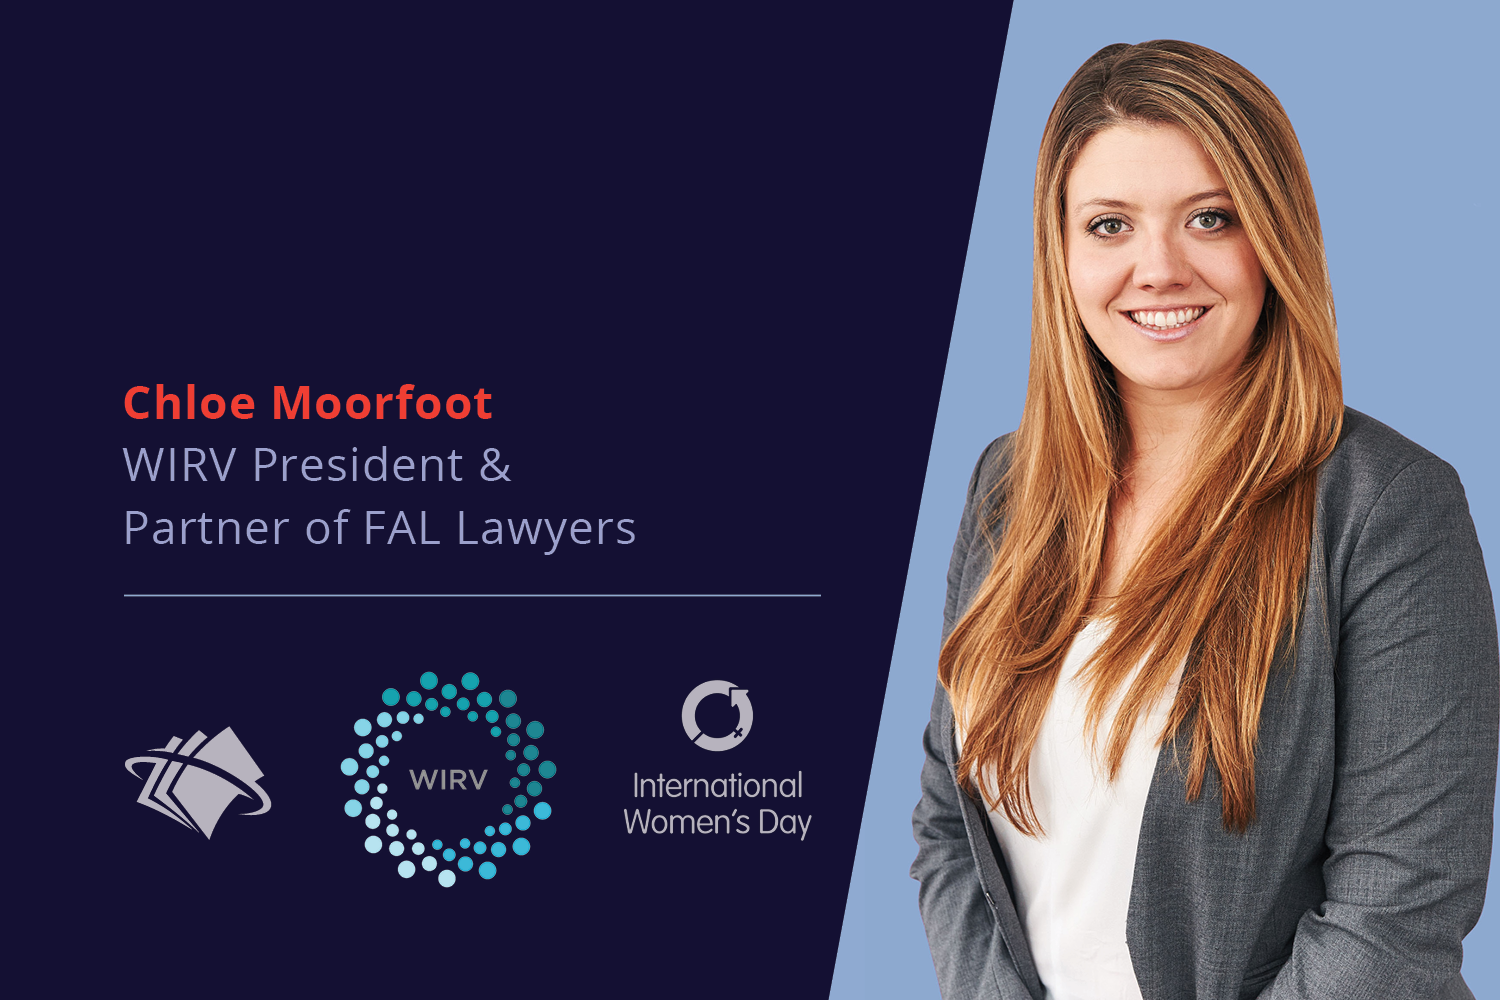 Chloe Moorfoot, WIRV President, Partner of FAL Lawyers